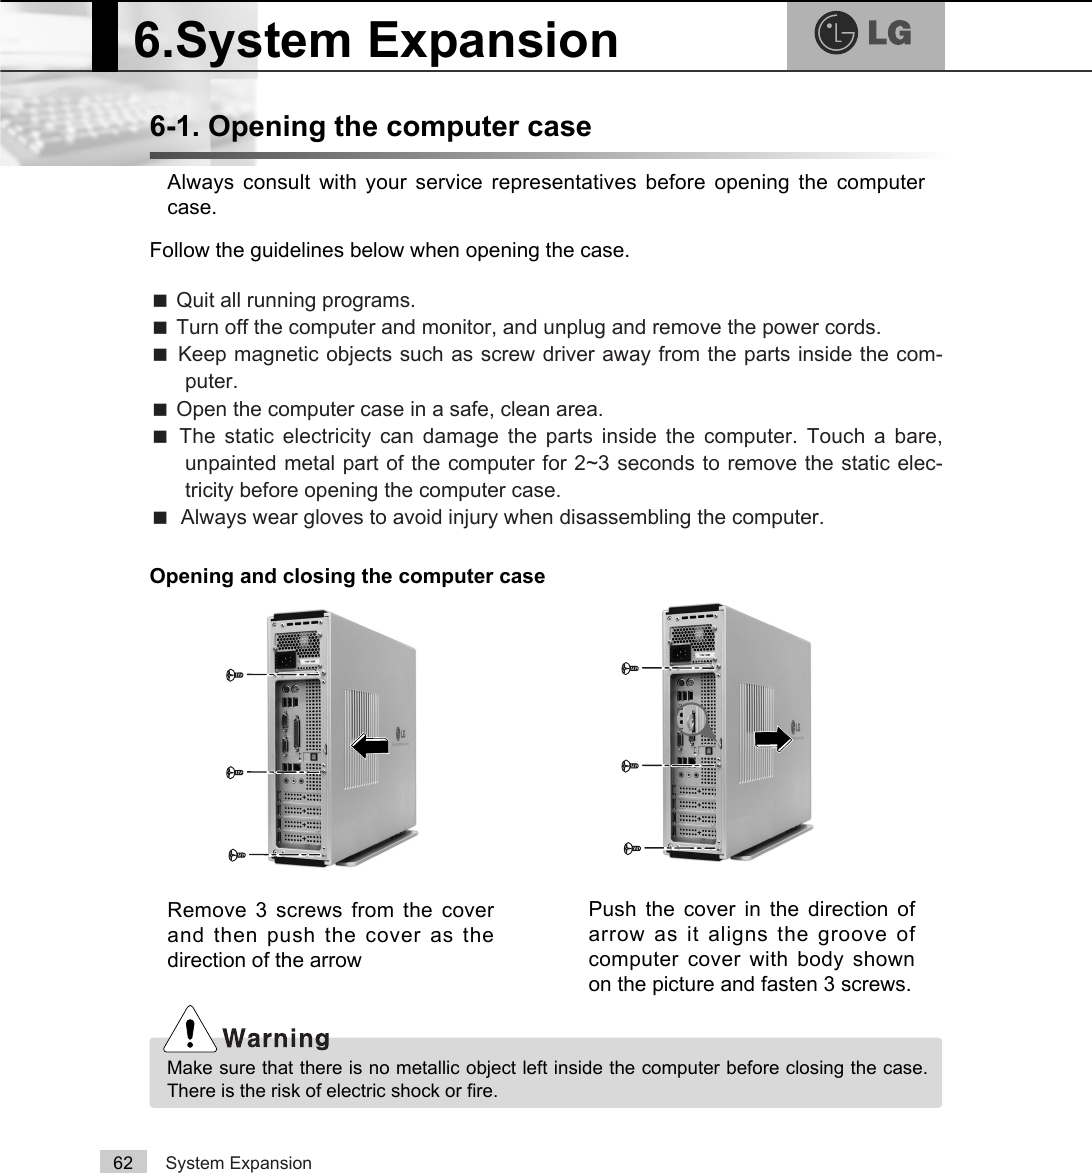 System Expansion626-1. Opening the computer caseAlways consult with your service representatives before opening the computercase.Follow the guidelines below when opening the case.Opening and closing the computer caseãQuit all running programs.ãTurn off the computer and monitor, and unplug and remove the power cords.ãKeep magnetic objects such as screw driver away from the parts inside the com-puter.ãOpen the computer case in a safe, clean area.ãThe static electricity can damage the parts inside the computer. Touch a bare,unpainted metal part of the computer for 2~3 seconds to remove the static elec-tricity before opening the computer case.ãAlways wear gloves to avoid injury when disassembling the computer.6.System ExpansionMake sure that there is no metallic object left inside the computer before closing the case.There is the risk of electric shock or fire.Remove 3 screws from the coverand then push the cover as thedirection of the arrowPush the cover in the direction ofarrow as it aligns the groove ofcomputer cover with body shownon the picture and fasten 3 screws.